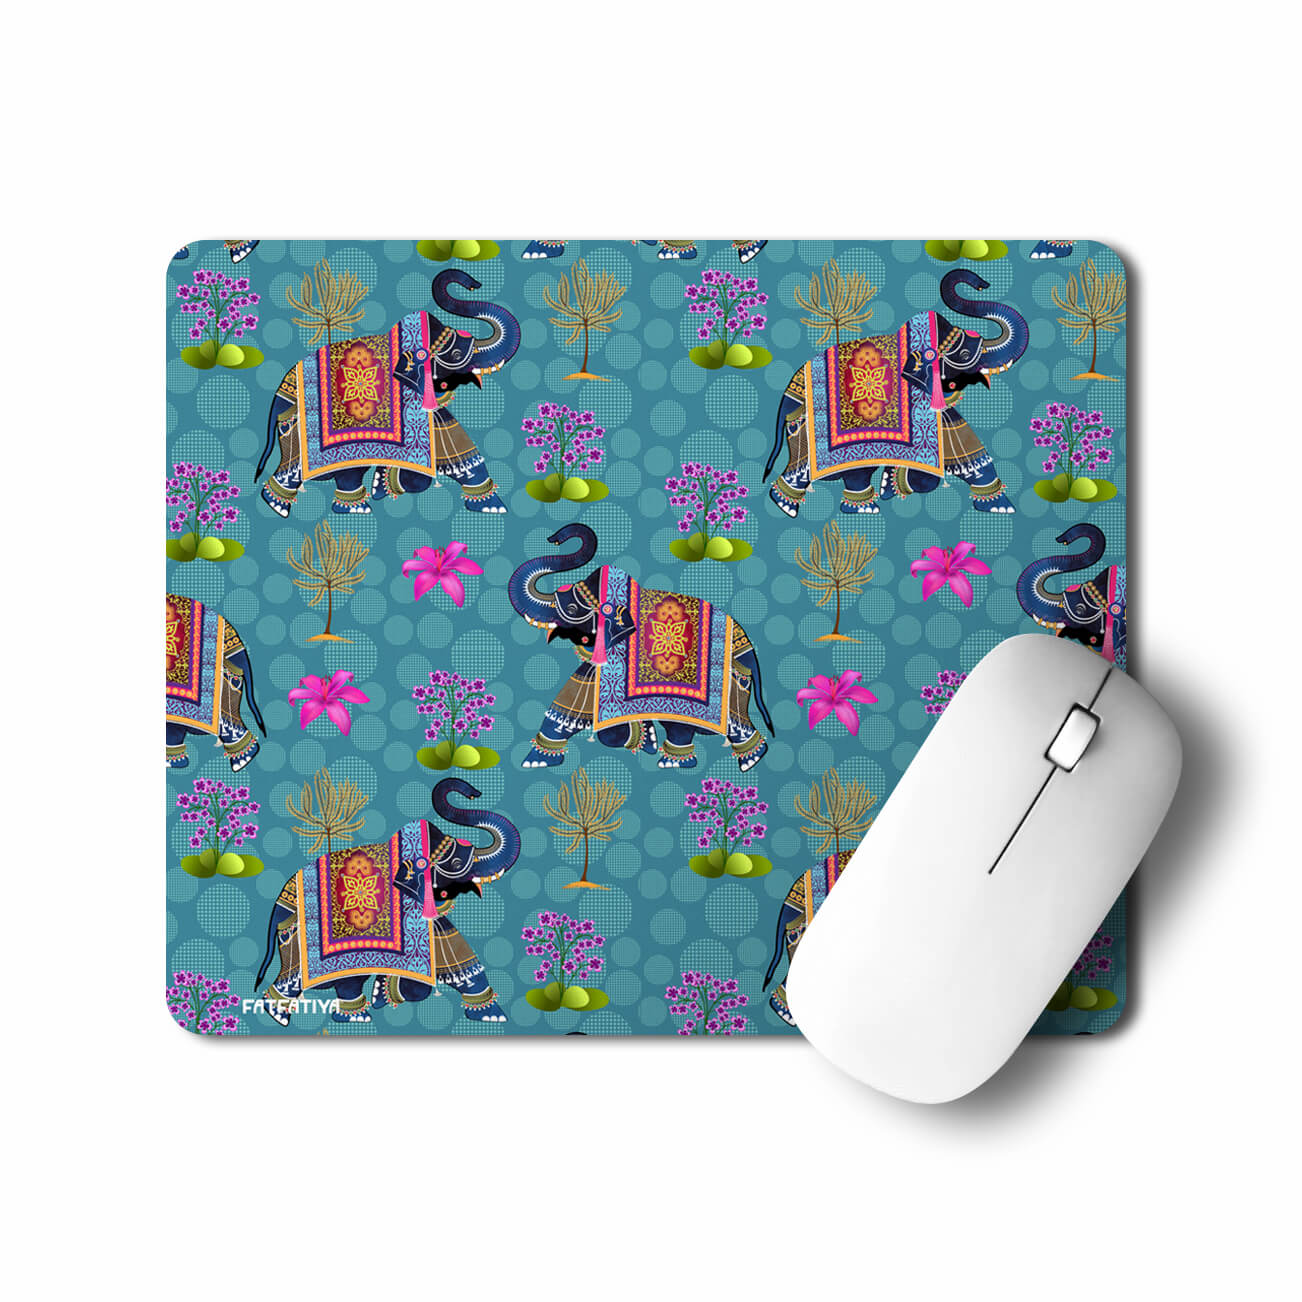 Royal Elephant The Best Mouse Pad